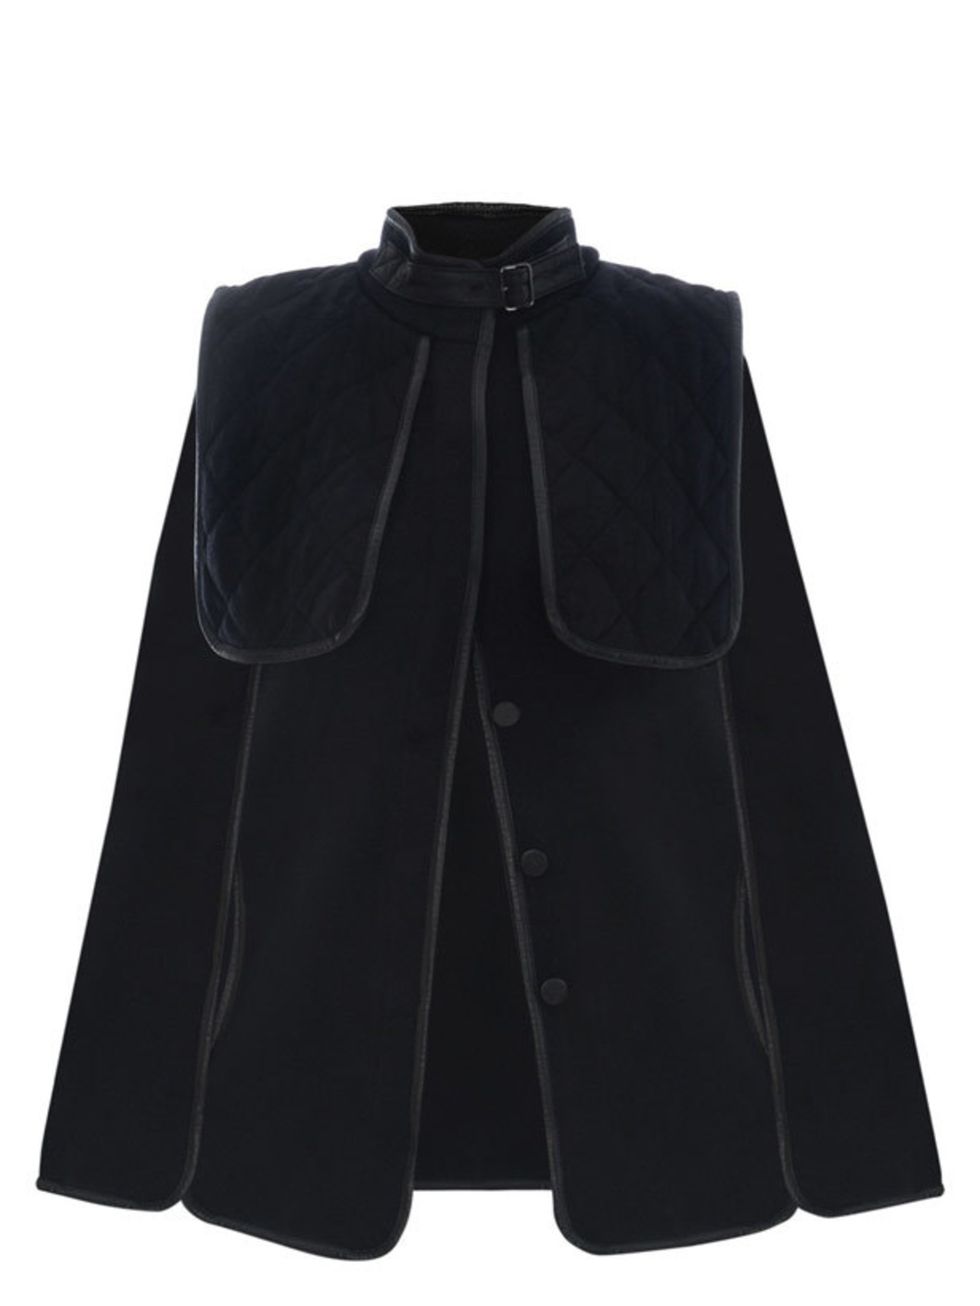 <p>3.1 Phillip Lim navy merino cape, £735, available at <a href="http://www.matchesfashion.com/fcp/content/Redirect/content?siteID=Hy3bqNL2jtQ-U2852Y9ERPKJ1NZk_3.nqA&amp;url=http://www.matchesfashion.com/fcp/product/Matches-Fashion/outerwear/3.1+phillip+l